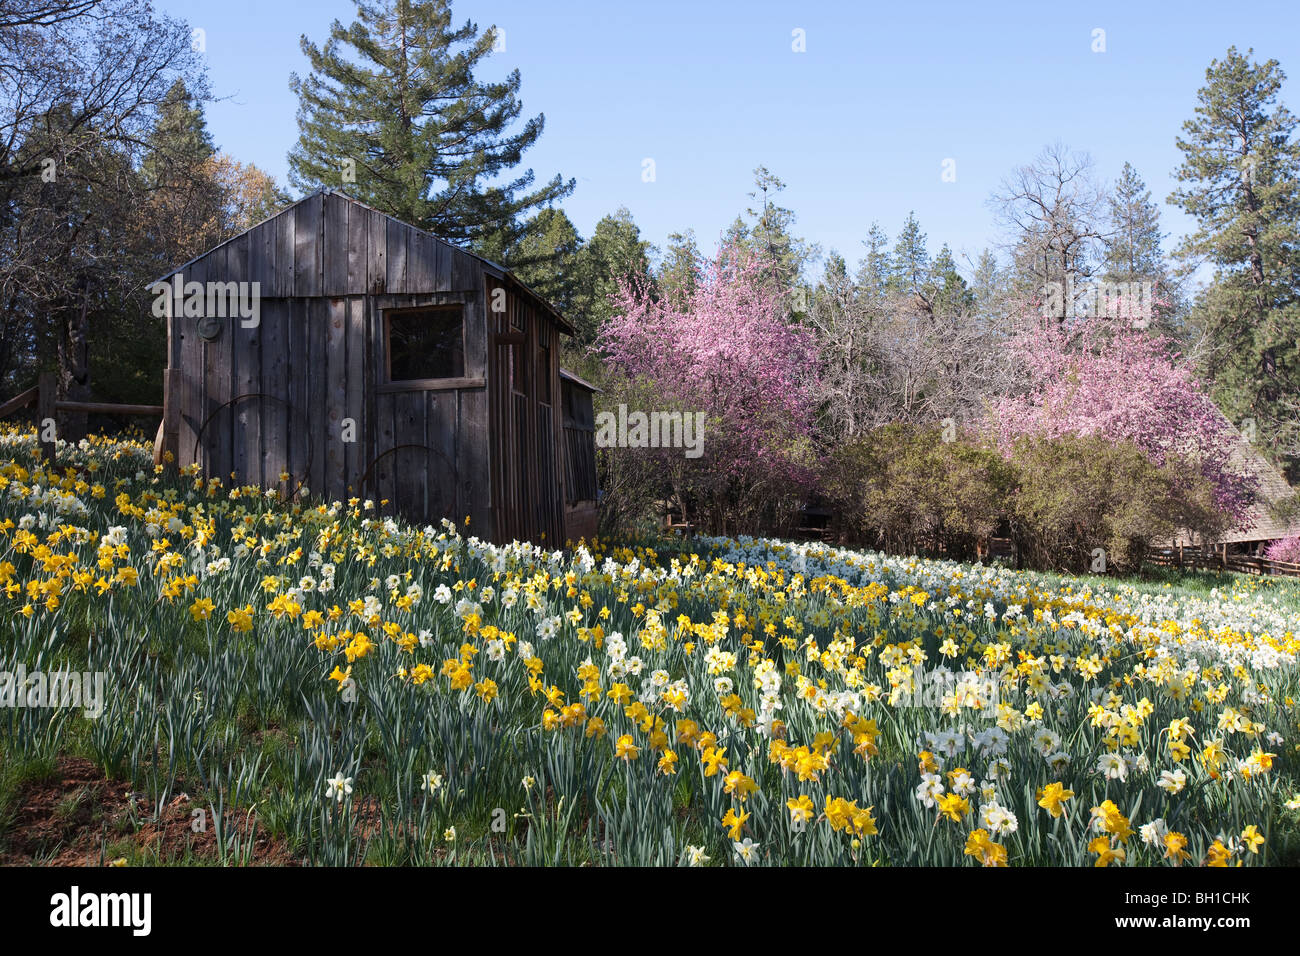 White and yellow daffodils and pink crabapple tree in full bloom at Daffodil Hill near the town of Volcano, Amador County, CA. Stock Photo